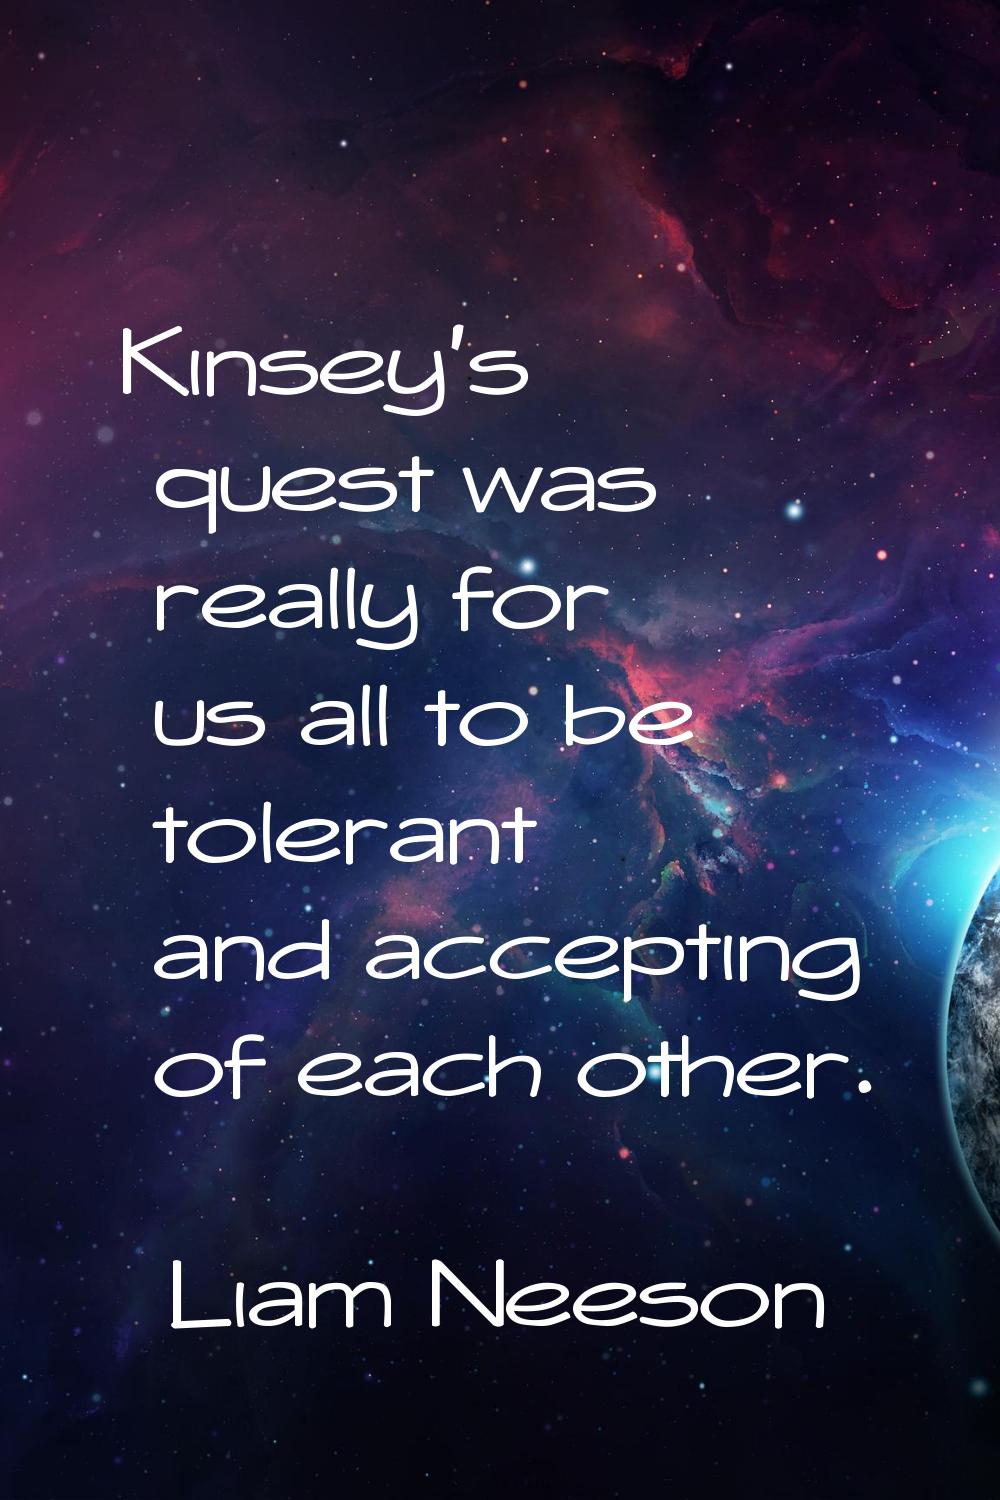 Kinsey's quest was really for us all to be tolerant and accepting of each other.